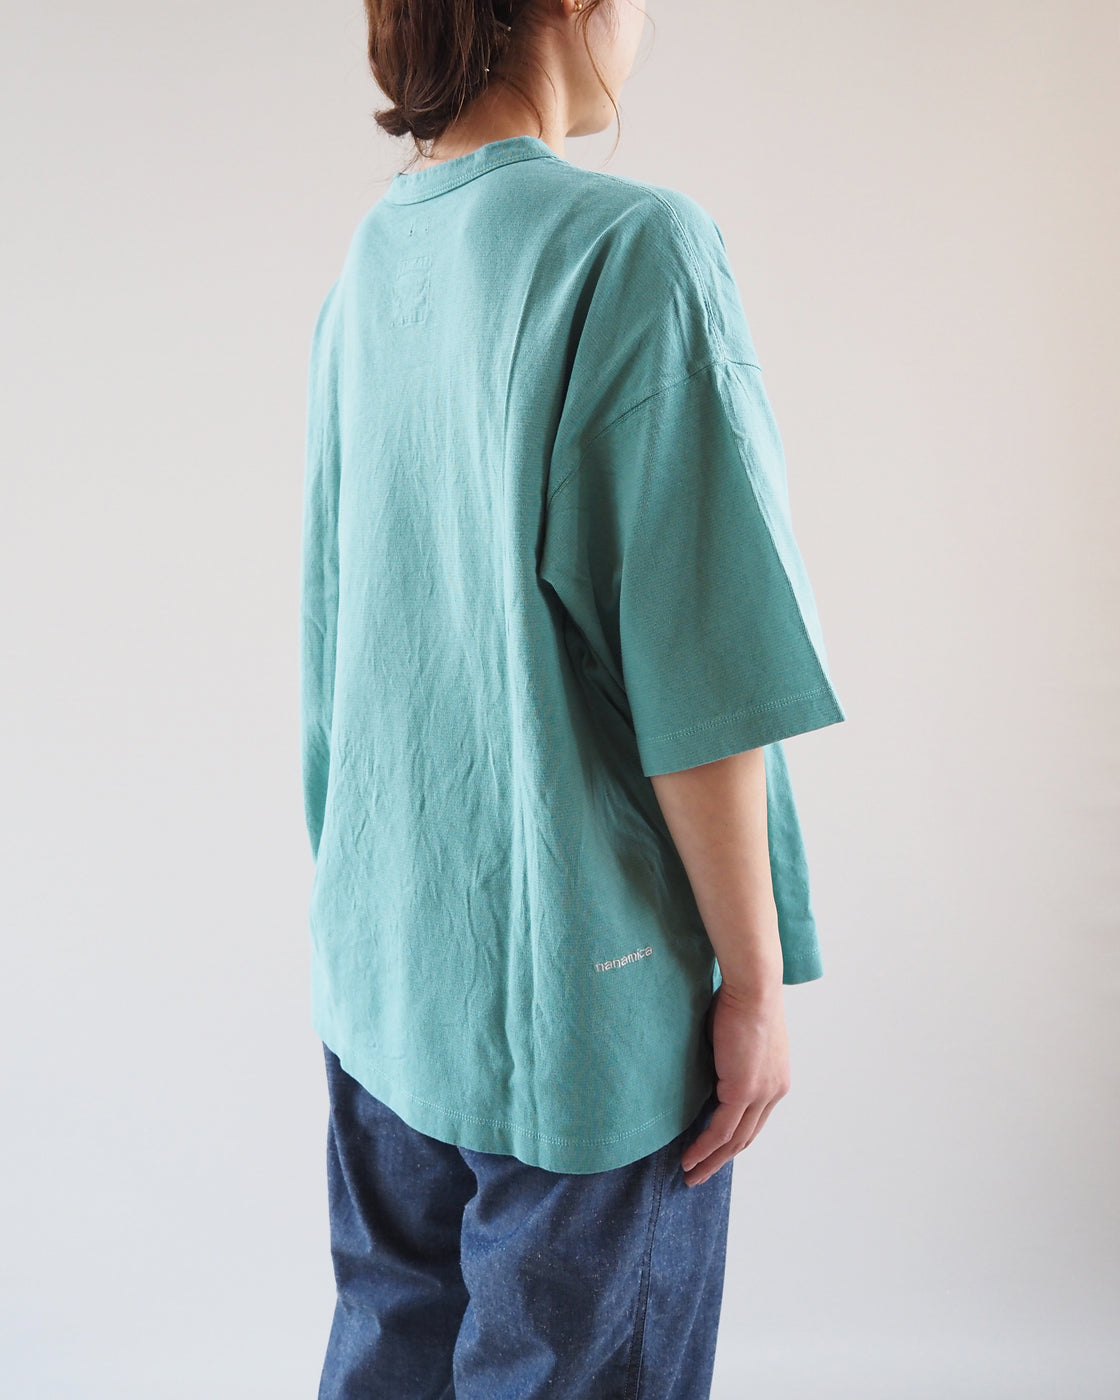 All Oversize Tees, Green